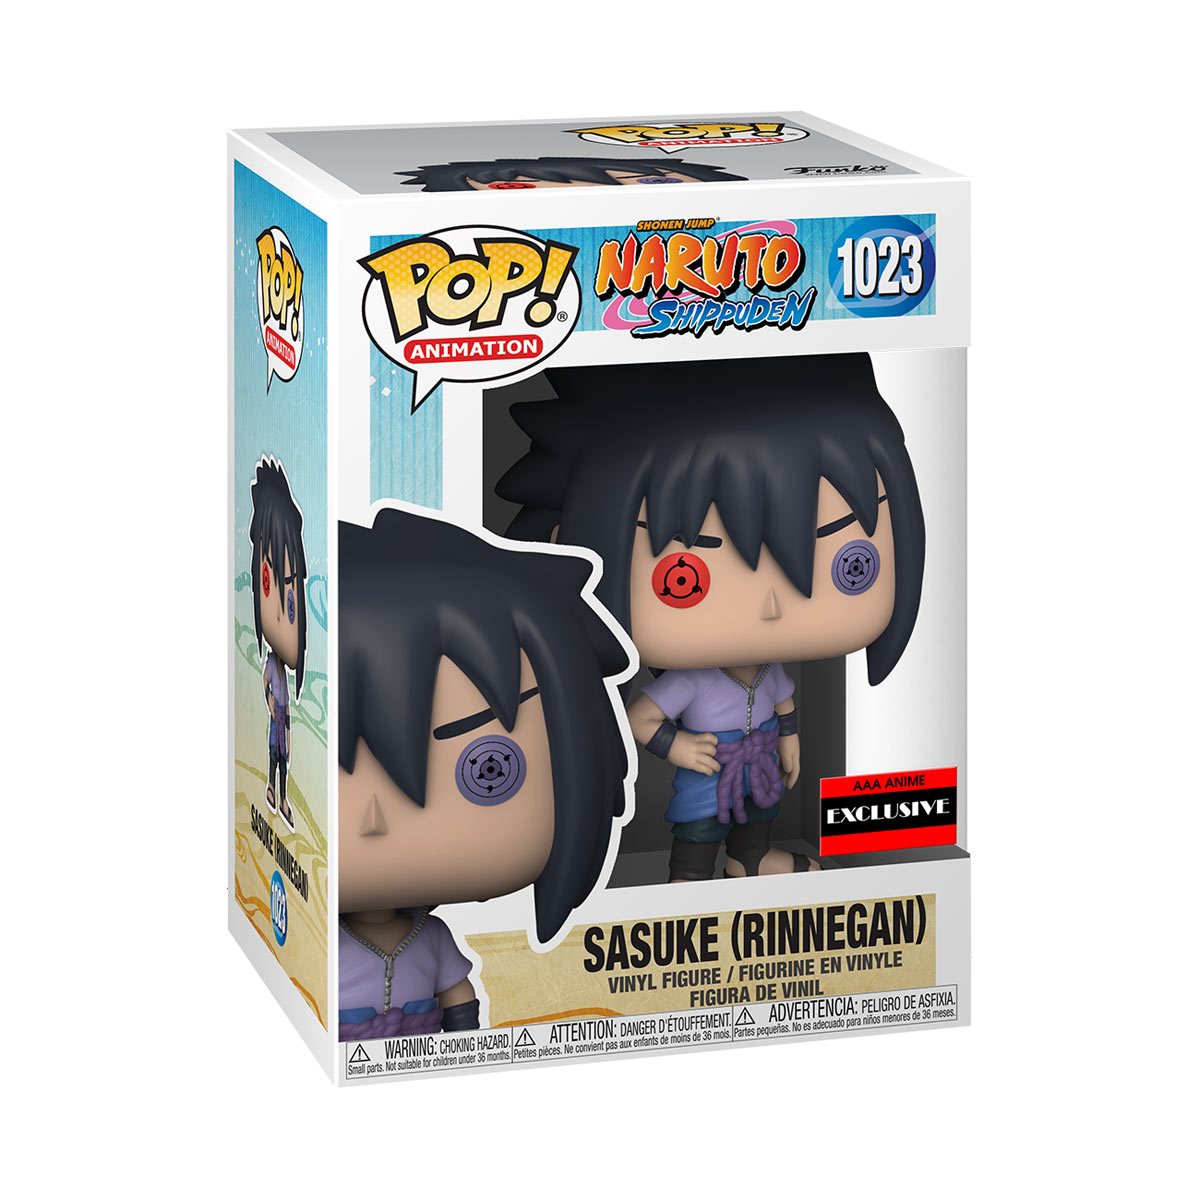 Naruto Sasuke Uchiha Rinnegan Pop! Vinyl Figure – AAA Anime Exclusive - Owls Collectibles - Trusted American Sports Cards & Toy Supplier Located In Delray Beach, Florida